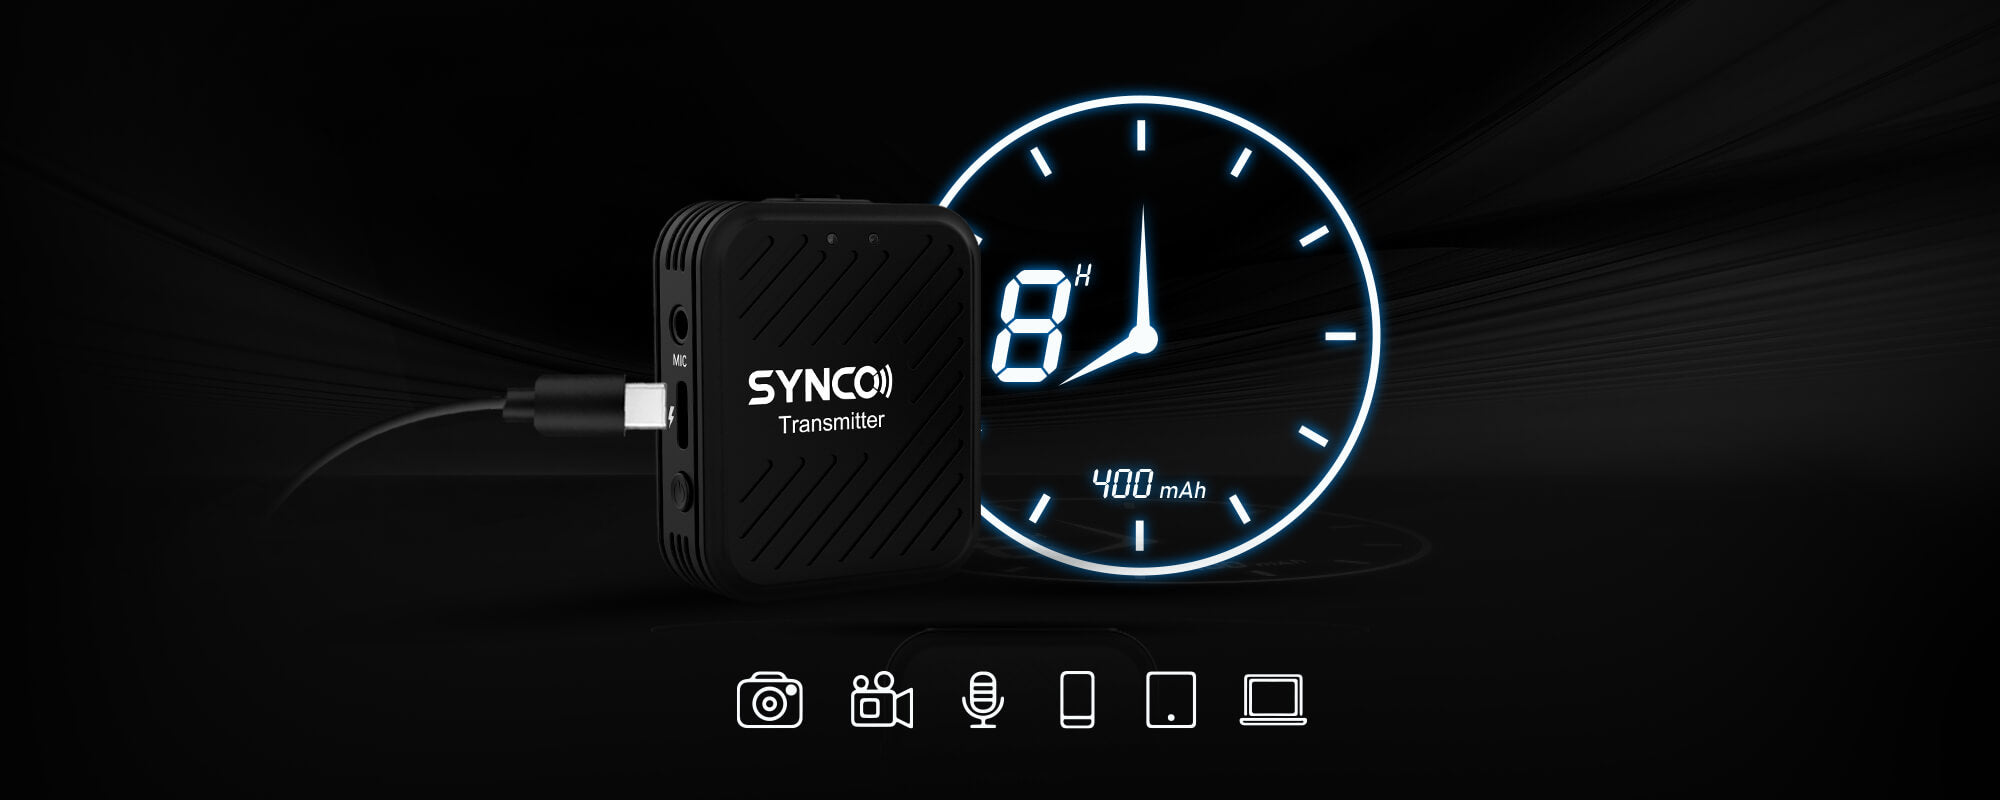 SYNCO G1(A2) is wireless stereo microphone for camcorder, cameras and mobile devices. It supports recording of 8 hours with 400mAh battery.